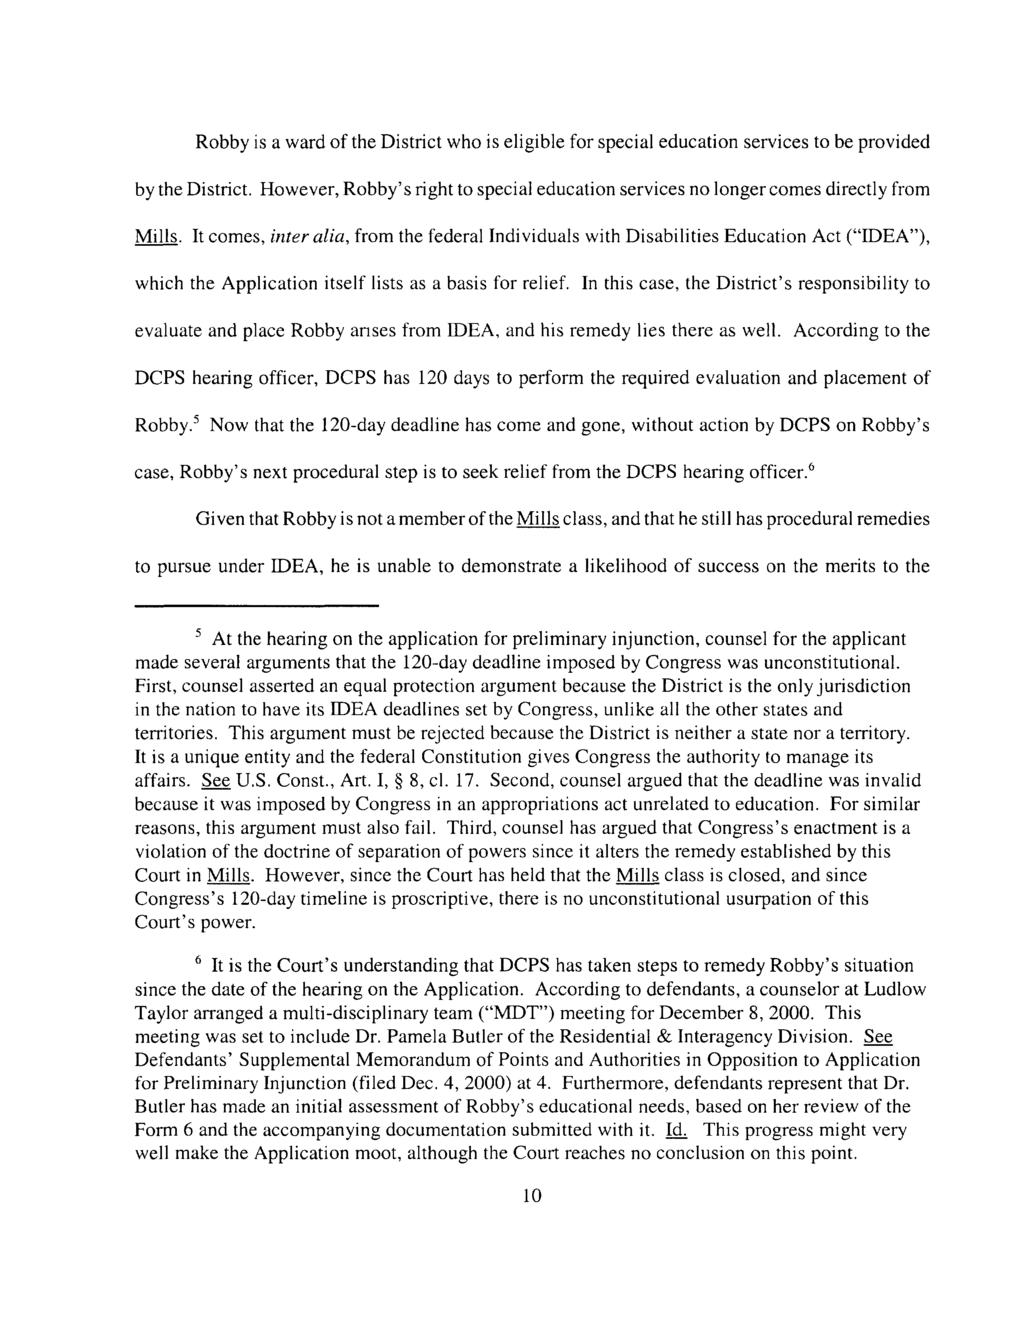 Case 1:71-cv-01939-JGP Document 27 Filed 01/04/01 Page 10 of 11 Robby is a ward of the District who is eligible for special education services to be provided by the District.